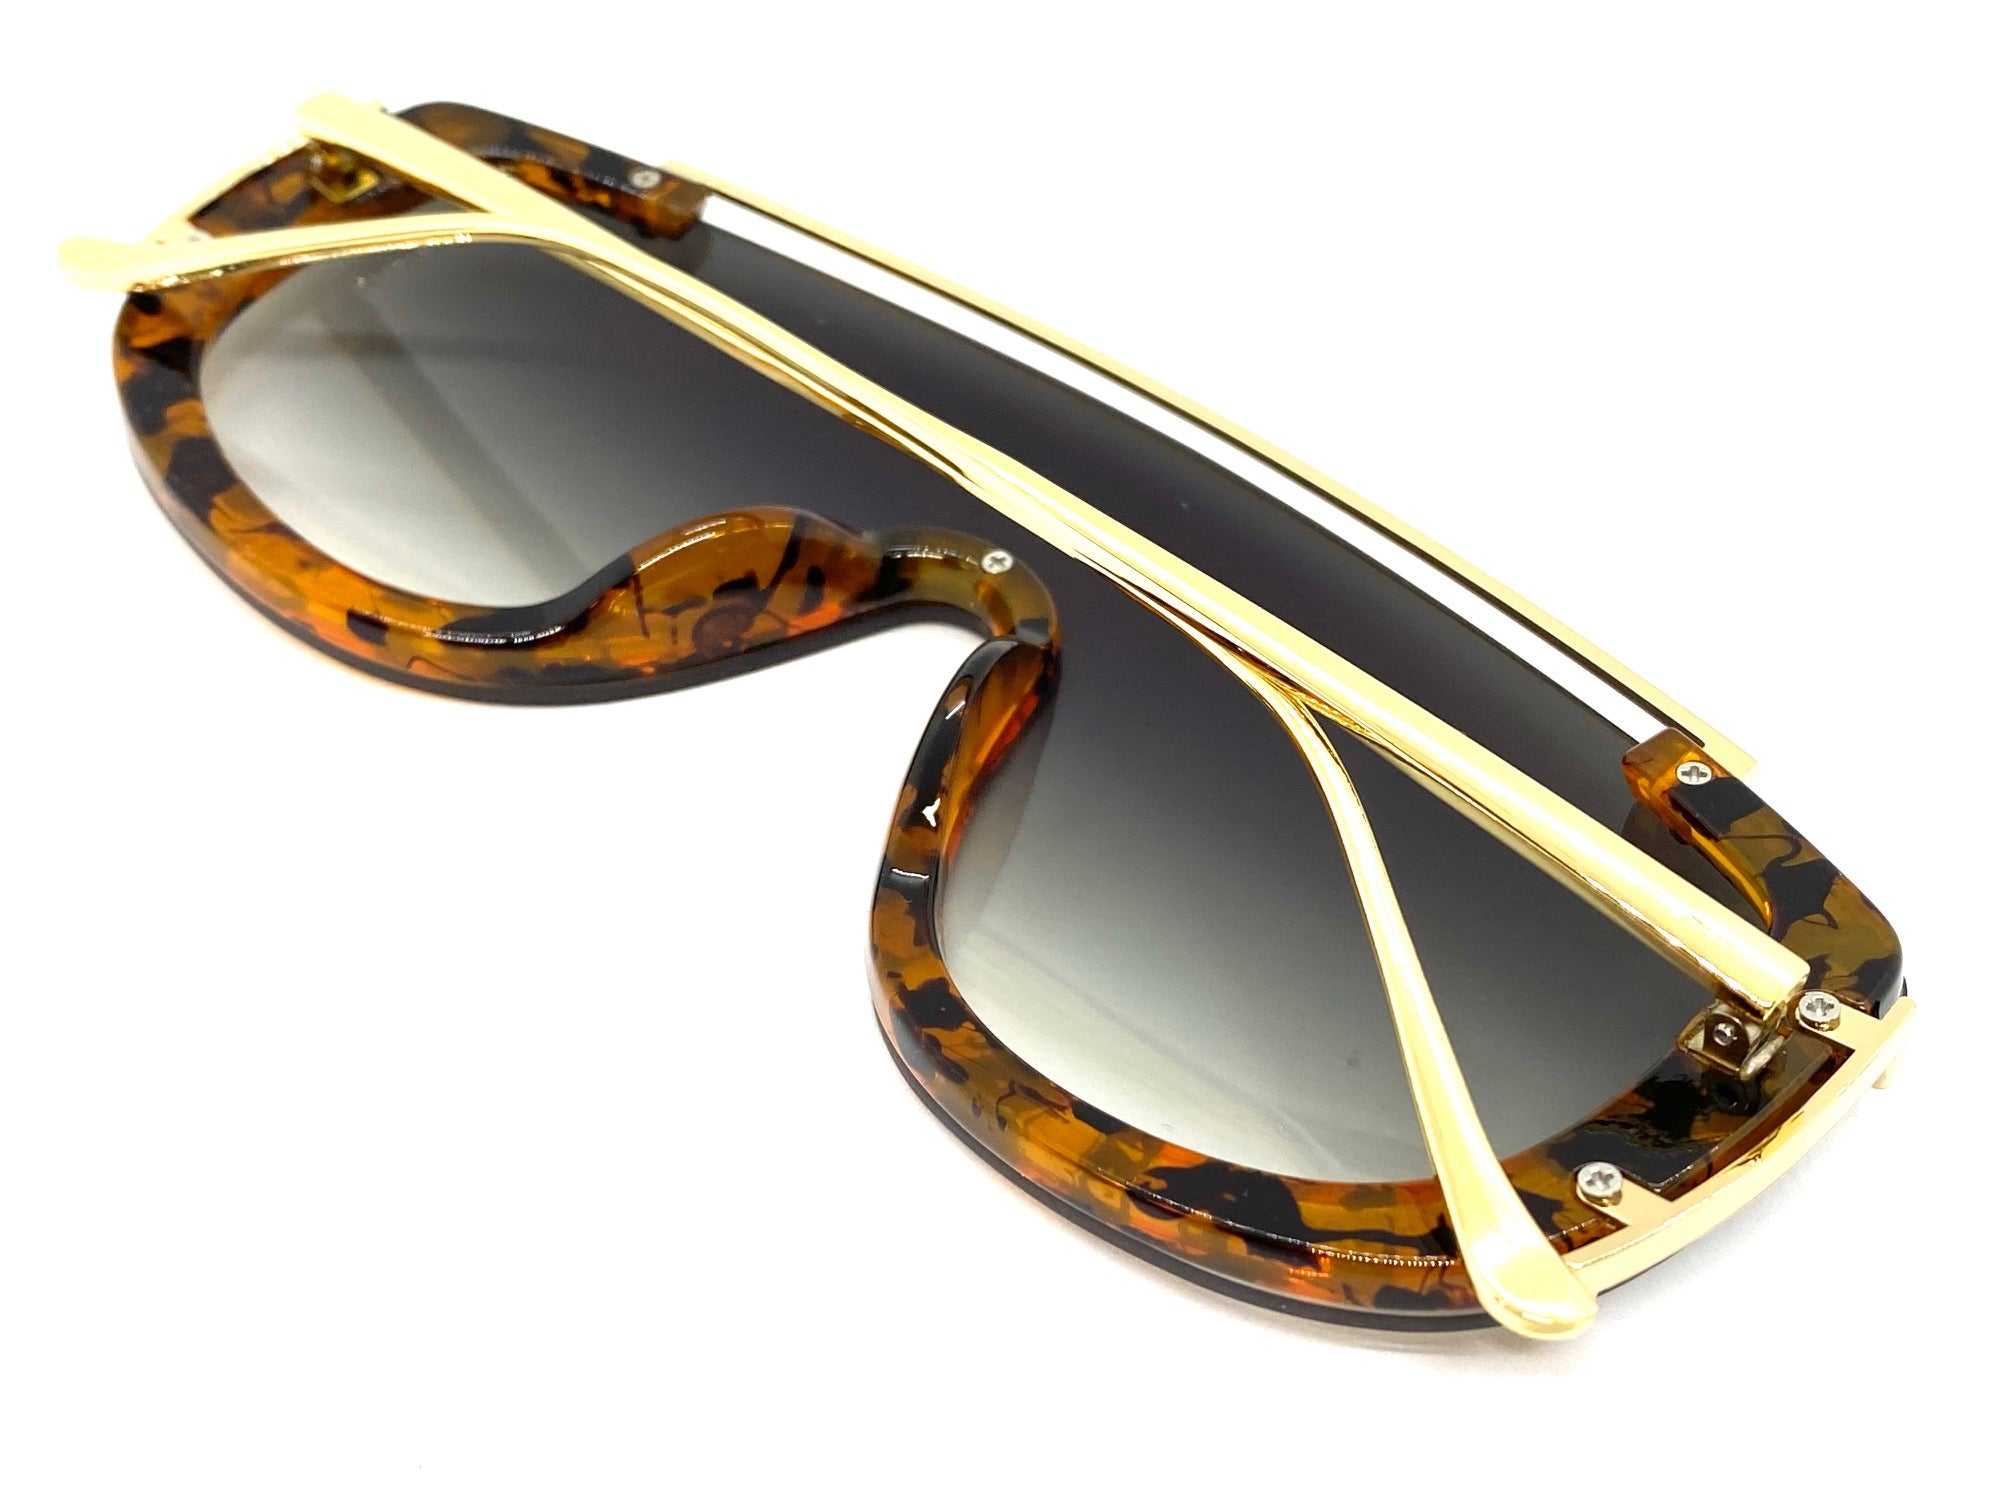 Designer Black And Gold Sunglasses For Men And Women Classic Square Full  Frame Vintage 1165 1.1 Shiny Gold Metal UV Protection Perfect For Outdoor  Activities From Luxurysunglasses, $47.13